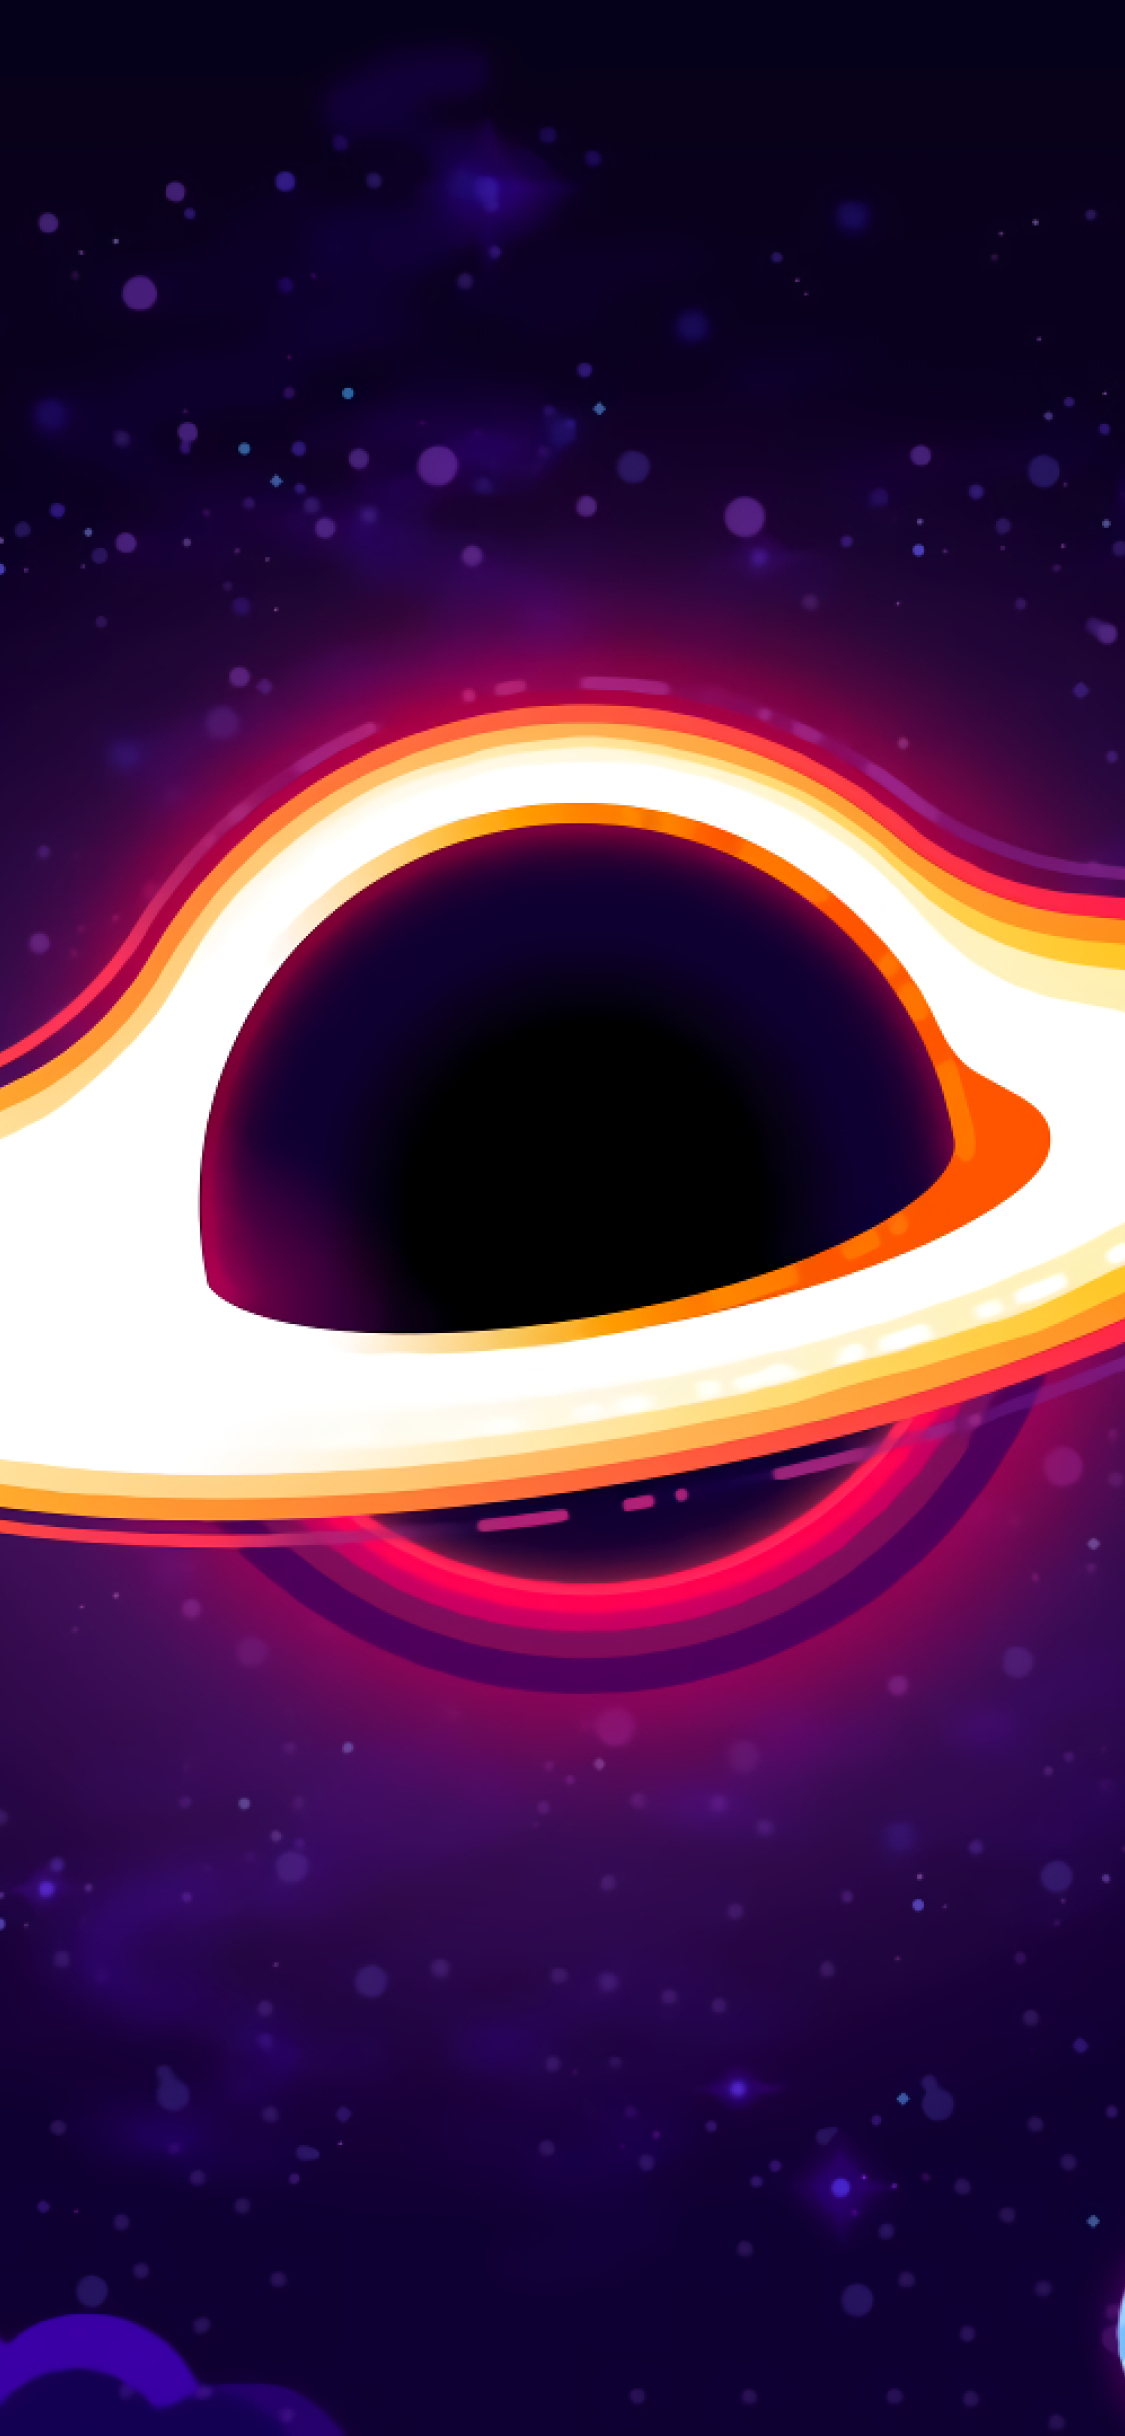 Black hole 4K Wallpapers  HD Wallpapers  ID 28153